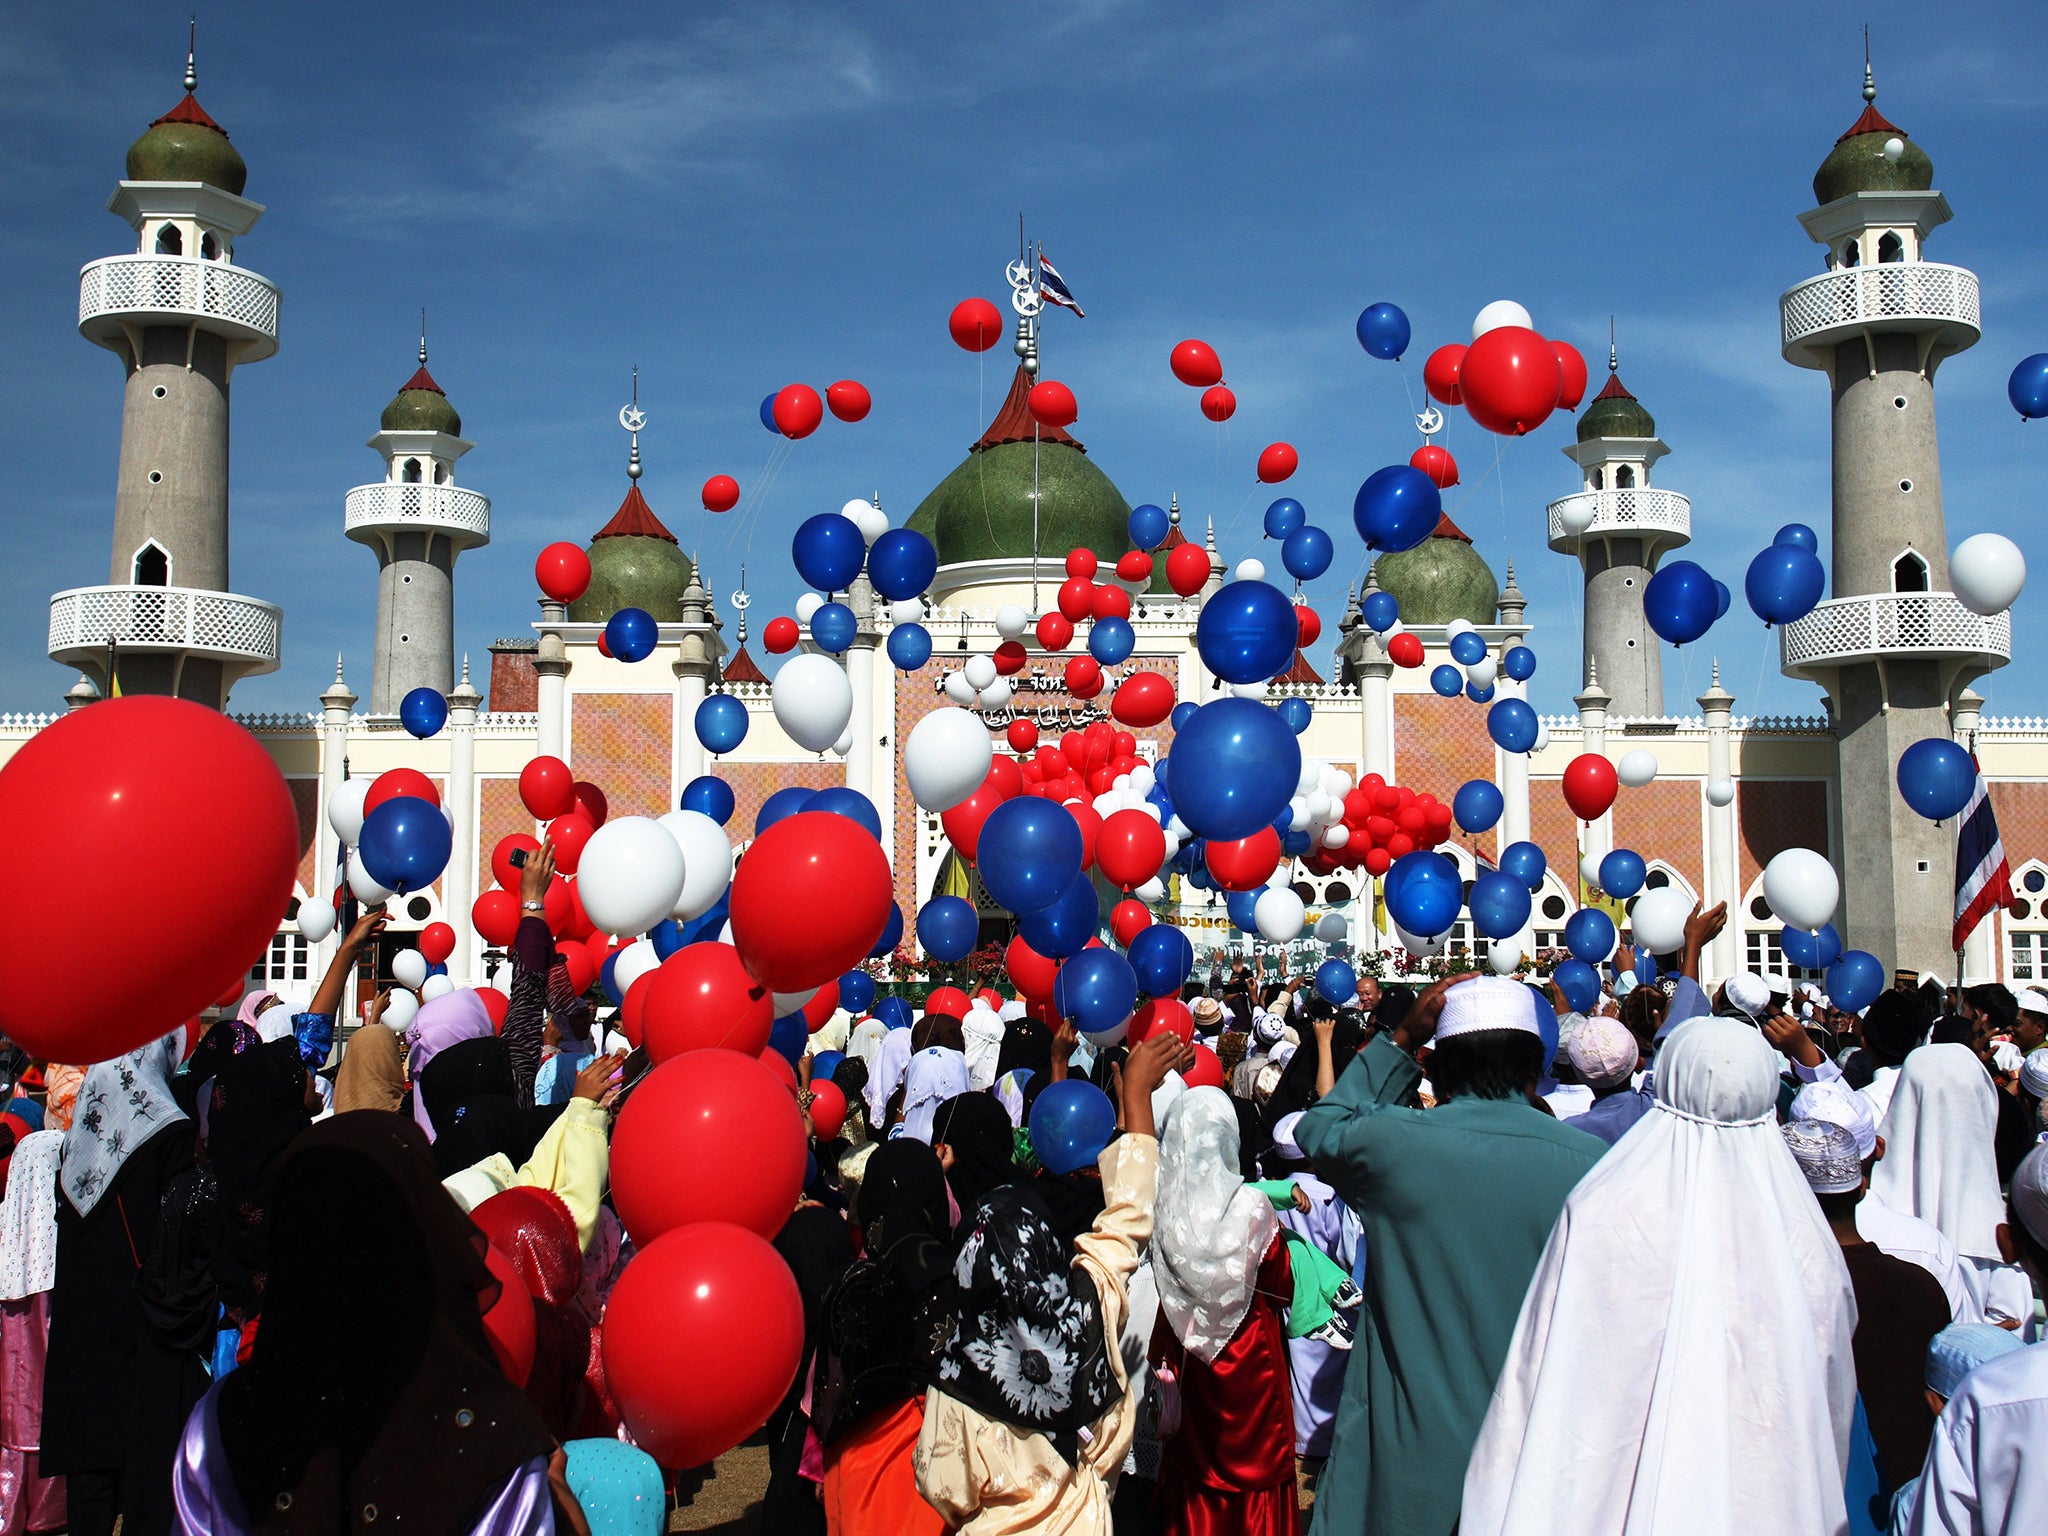 Eid al-Fitr marks the end of Ramadan, the Islamic holy month of fasting